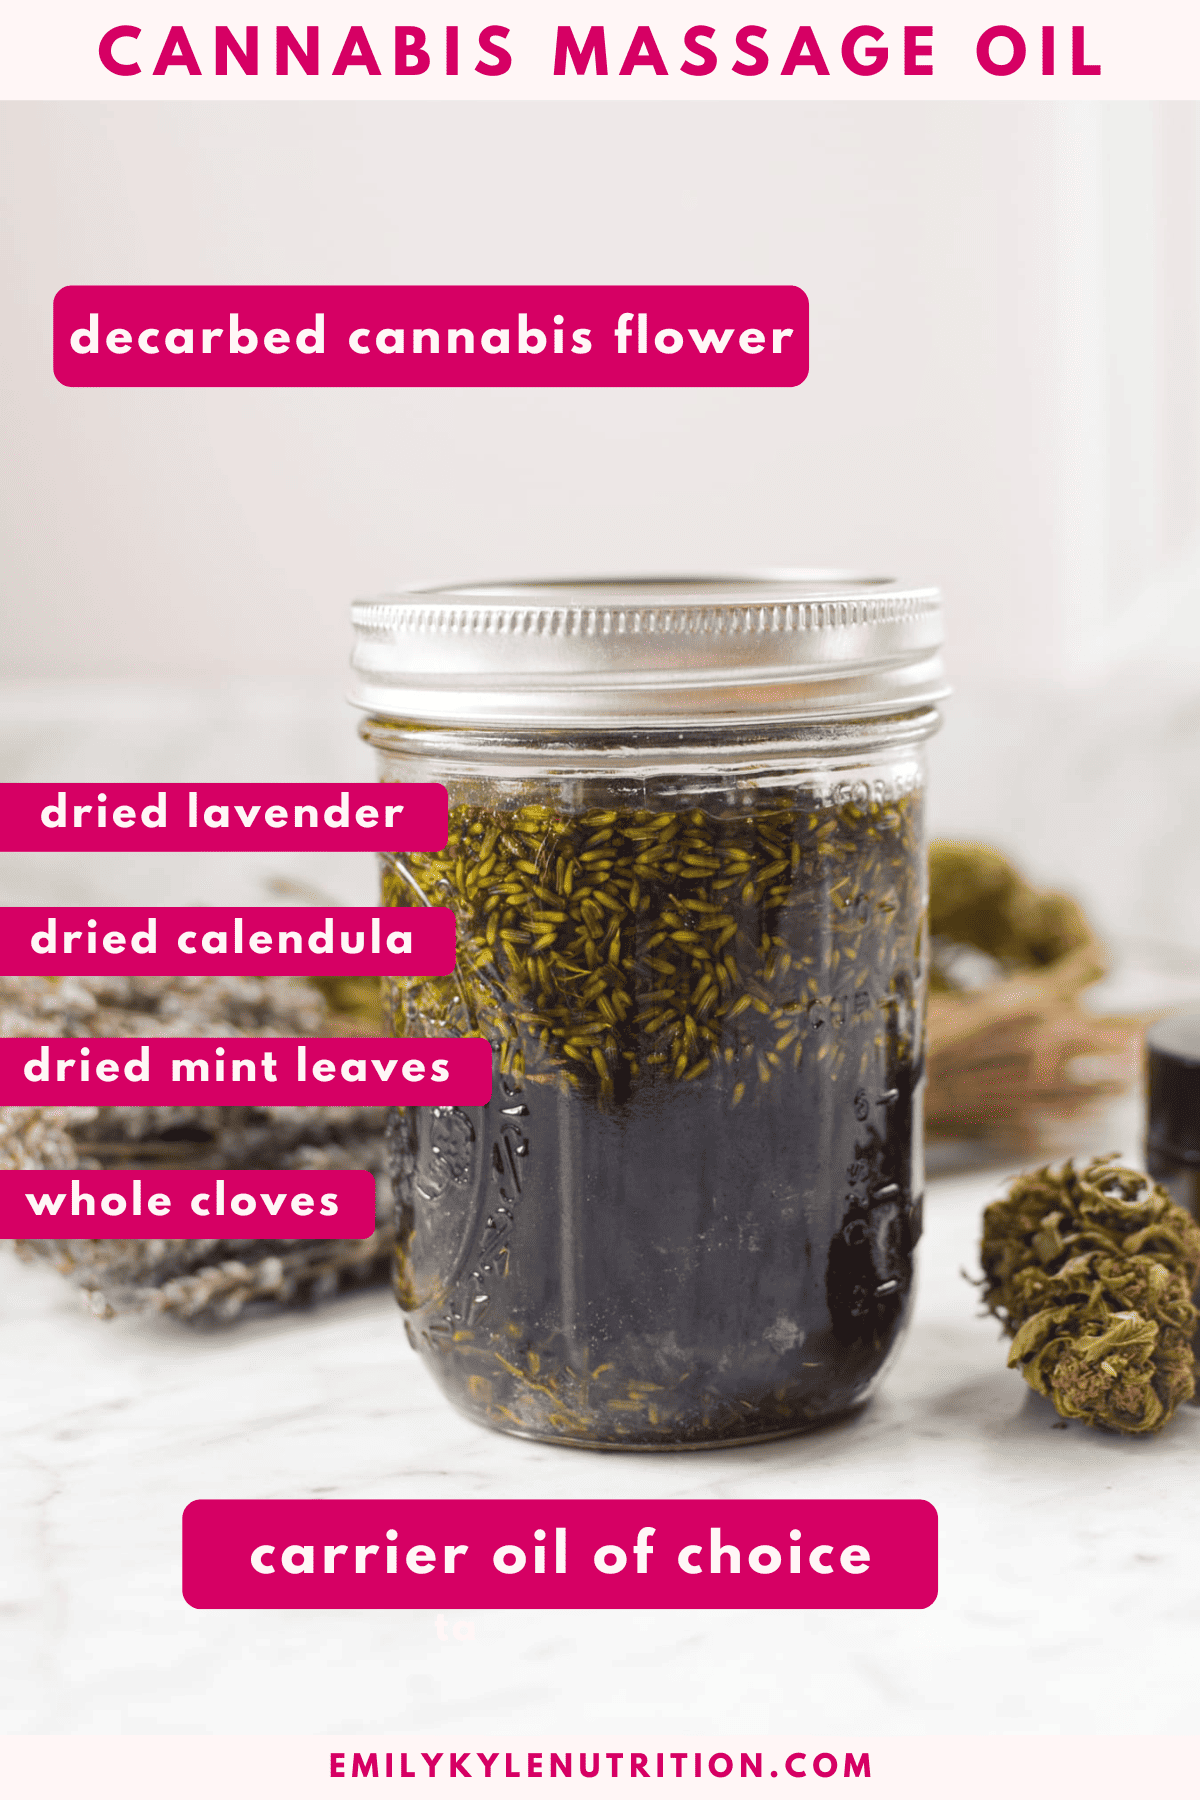 A picture of cannabis massage oil with the ingredients needed to make it labeled in pink.